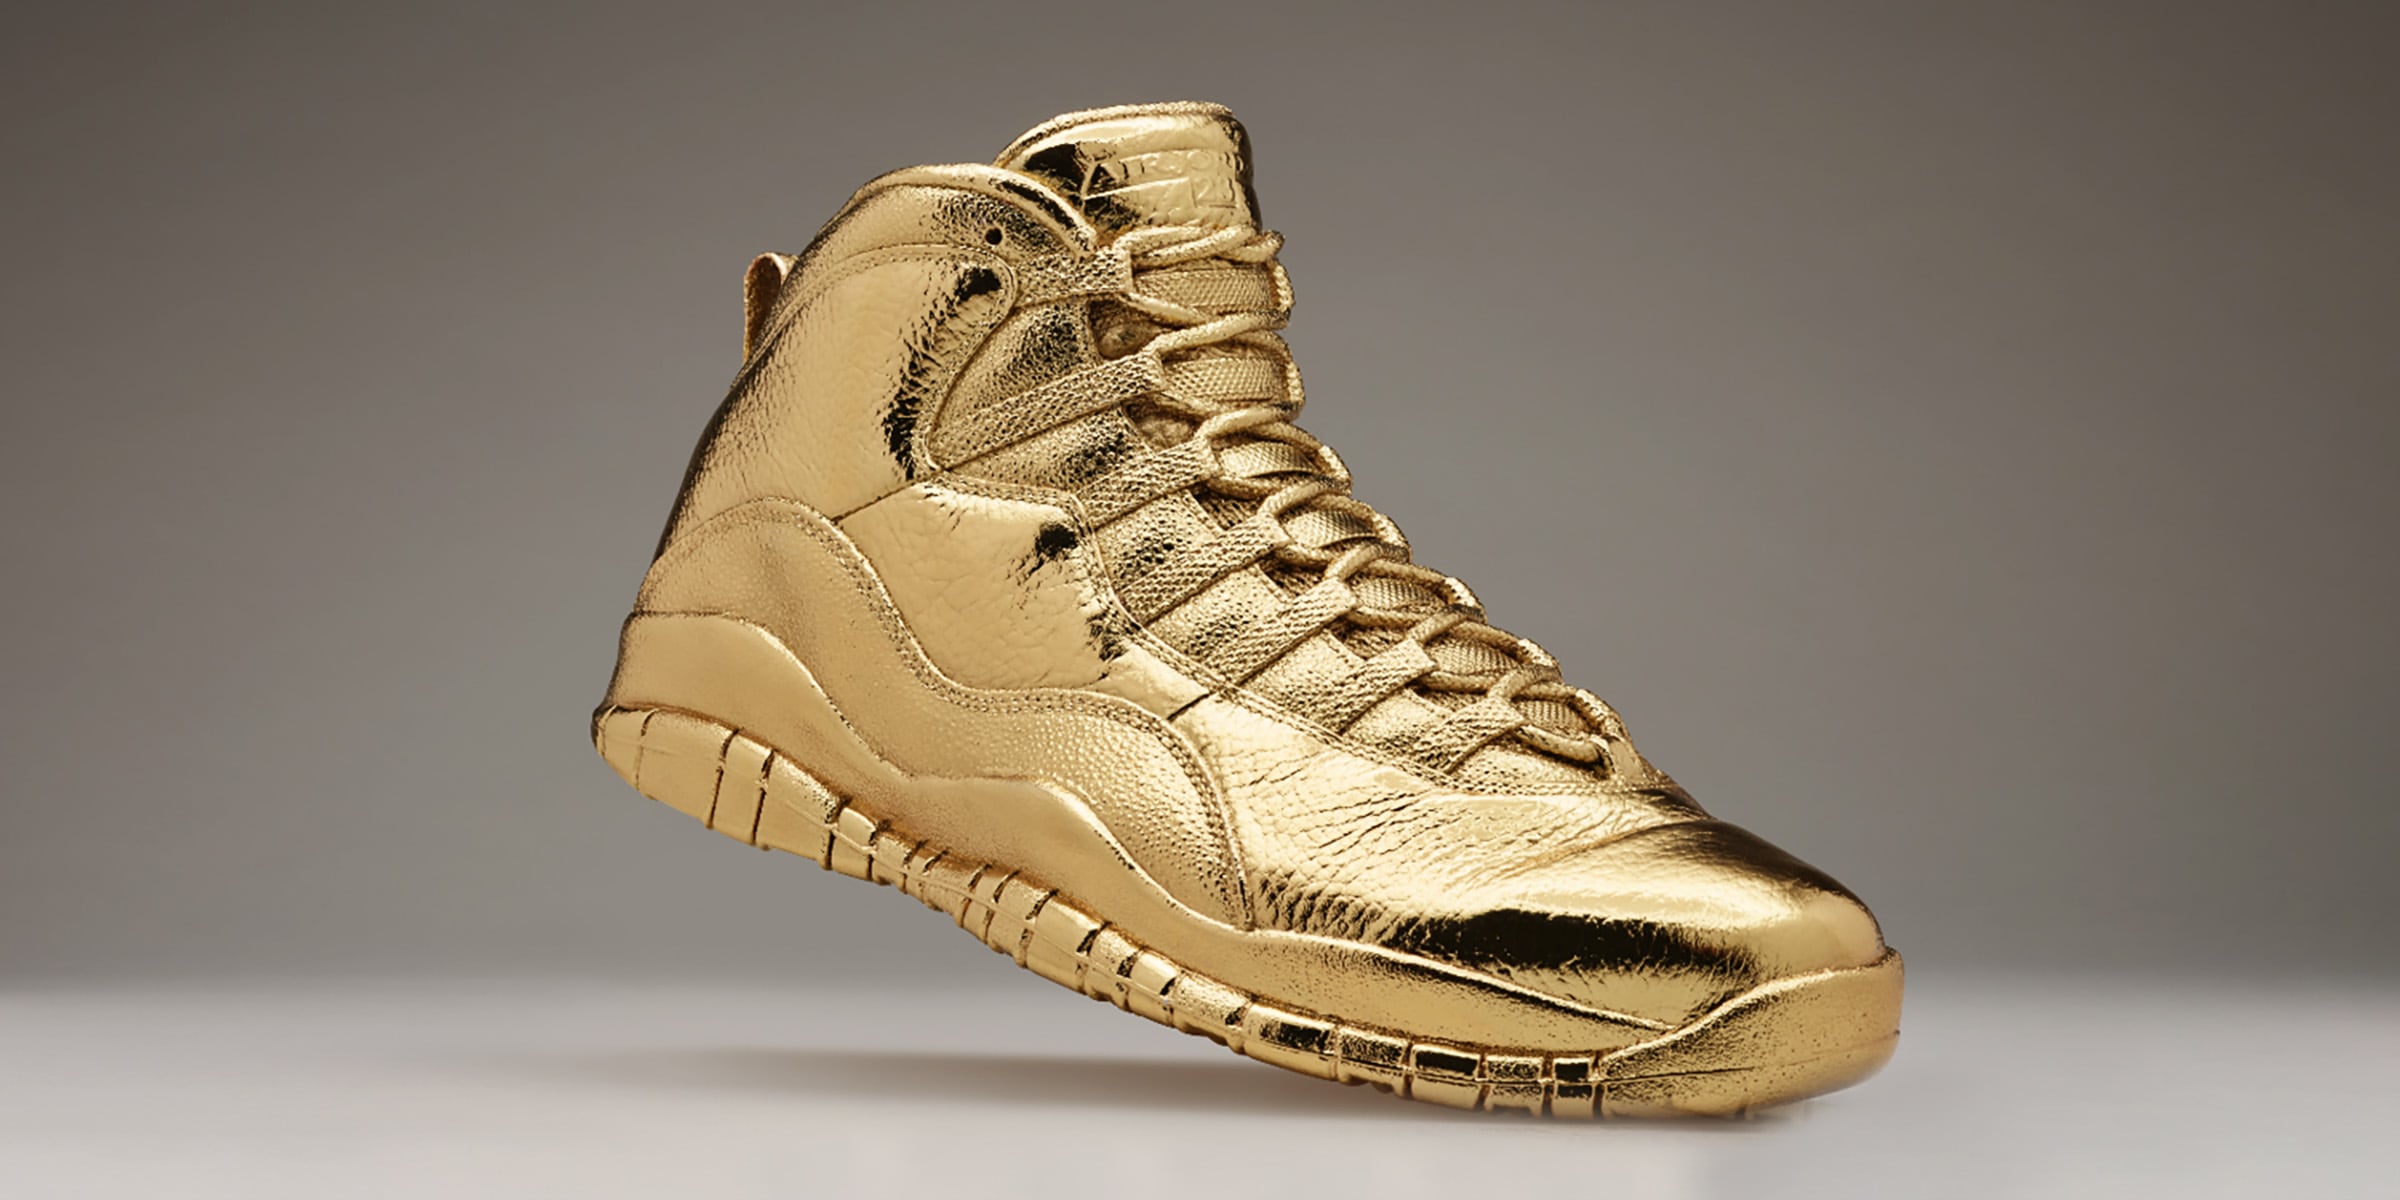 Trouble Gentleman friendly Light 21 Most Expensive Sneakers Of All Time (2023 Ranking)